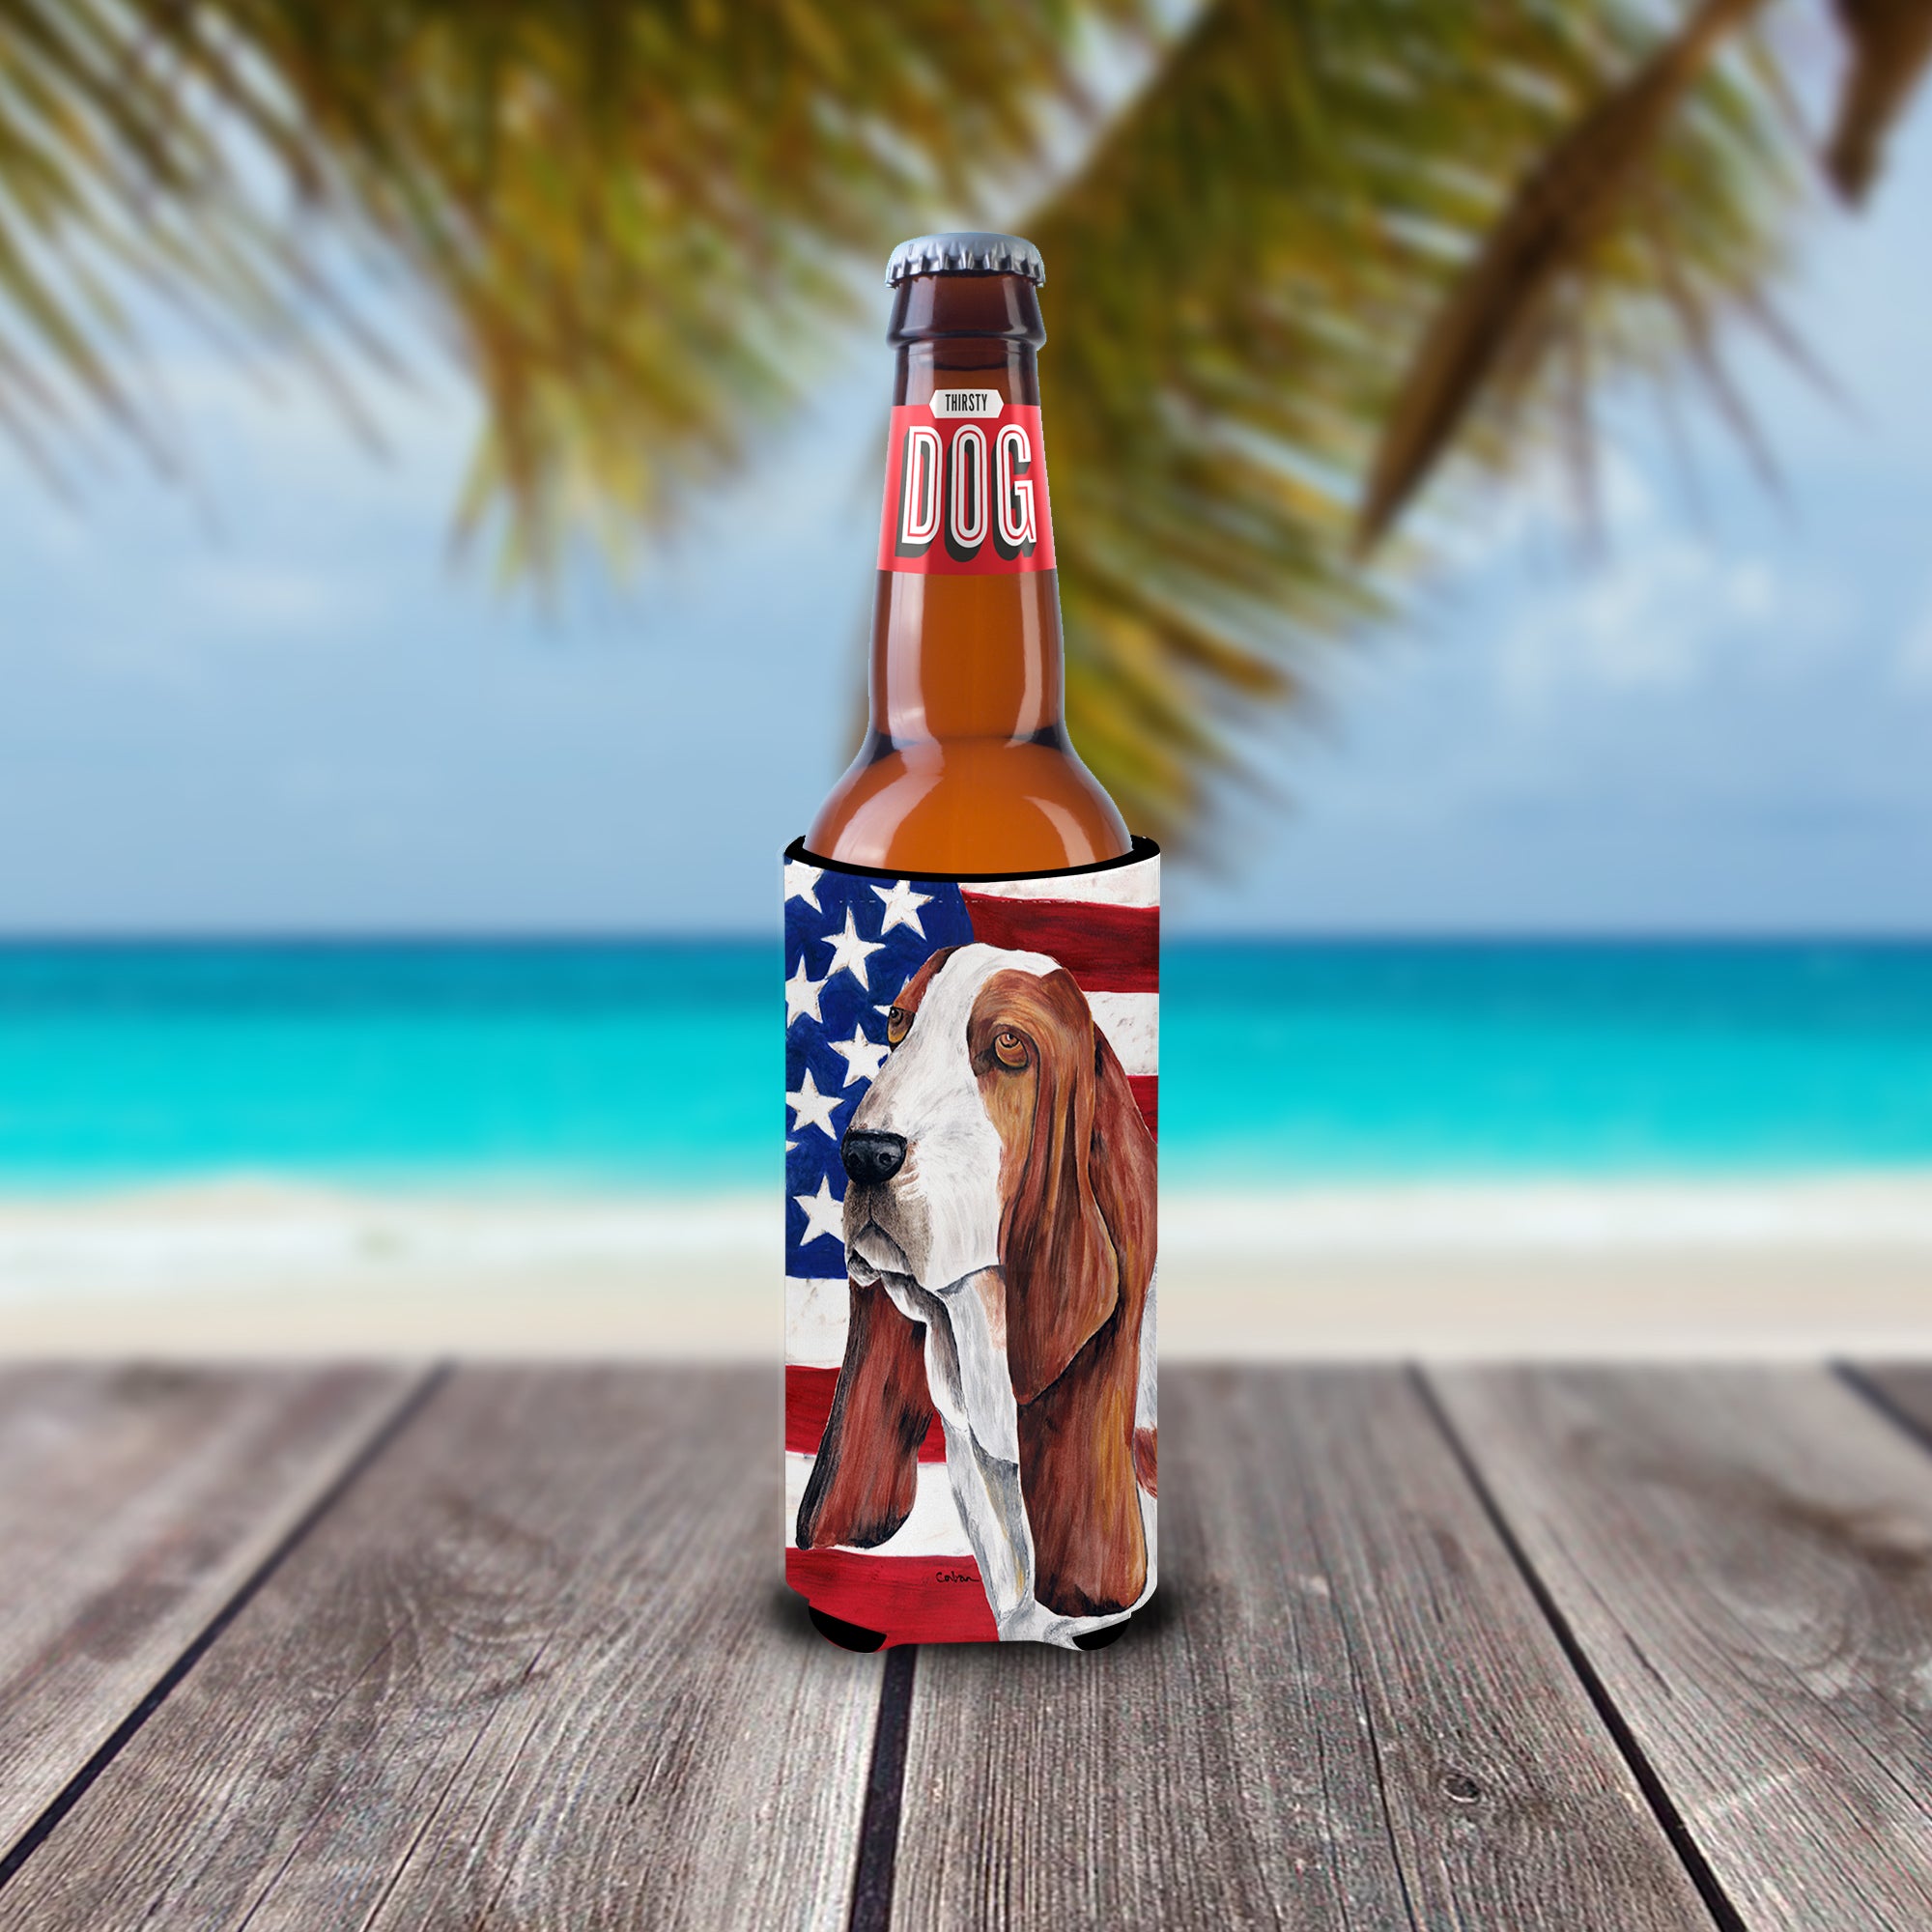 USA American Flag with Basset Hound Ultra Beverage Insulators for slim cans SC9004MUK